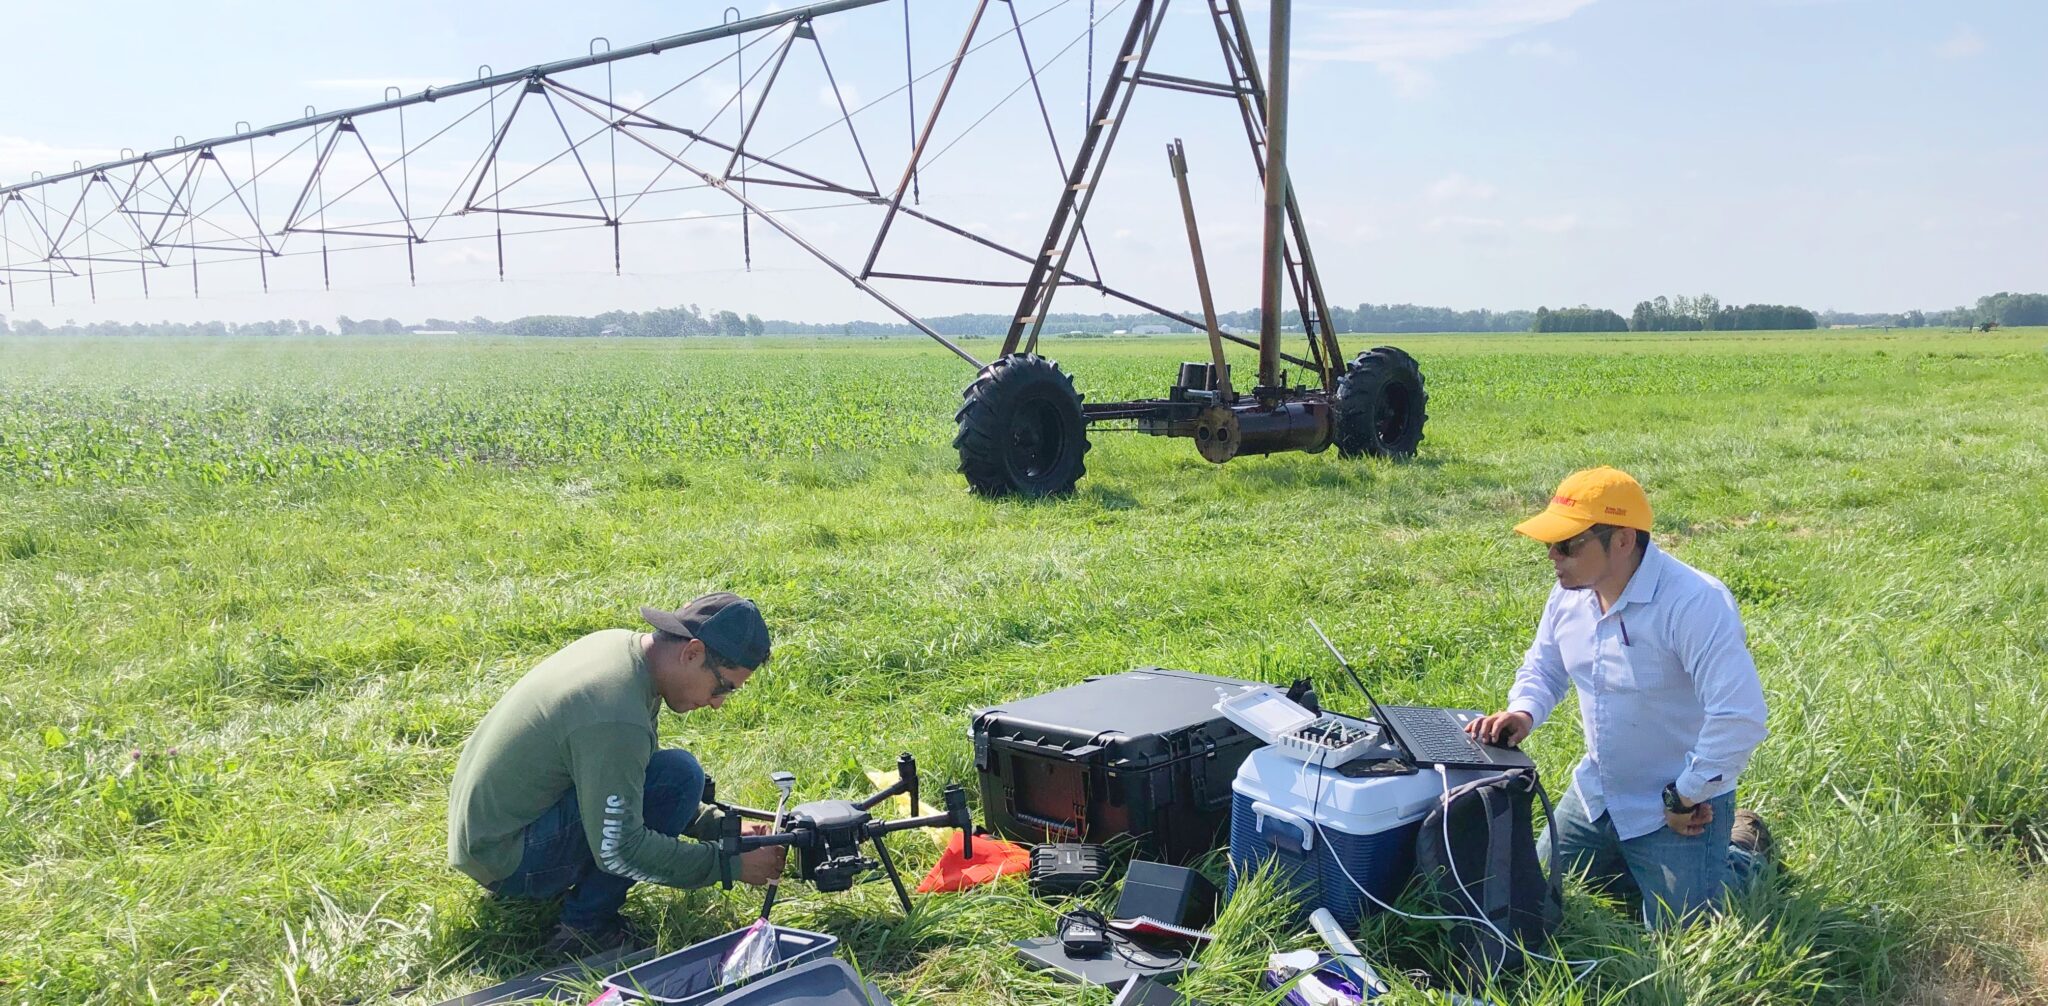 Postdoctoral researcher Carlos Gongora and lab technician Andrés Cruz prepare equipment before deploying a weather station and UAV for data collection at Pinney Purdue Agricultural Center.